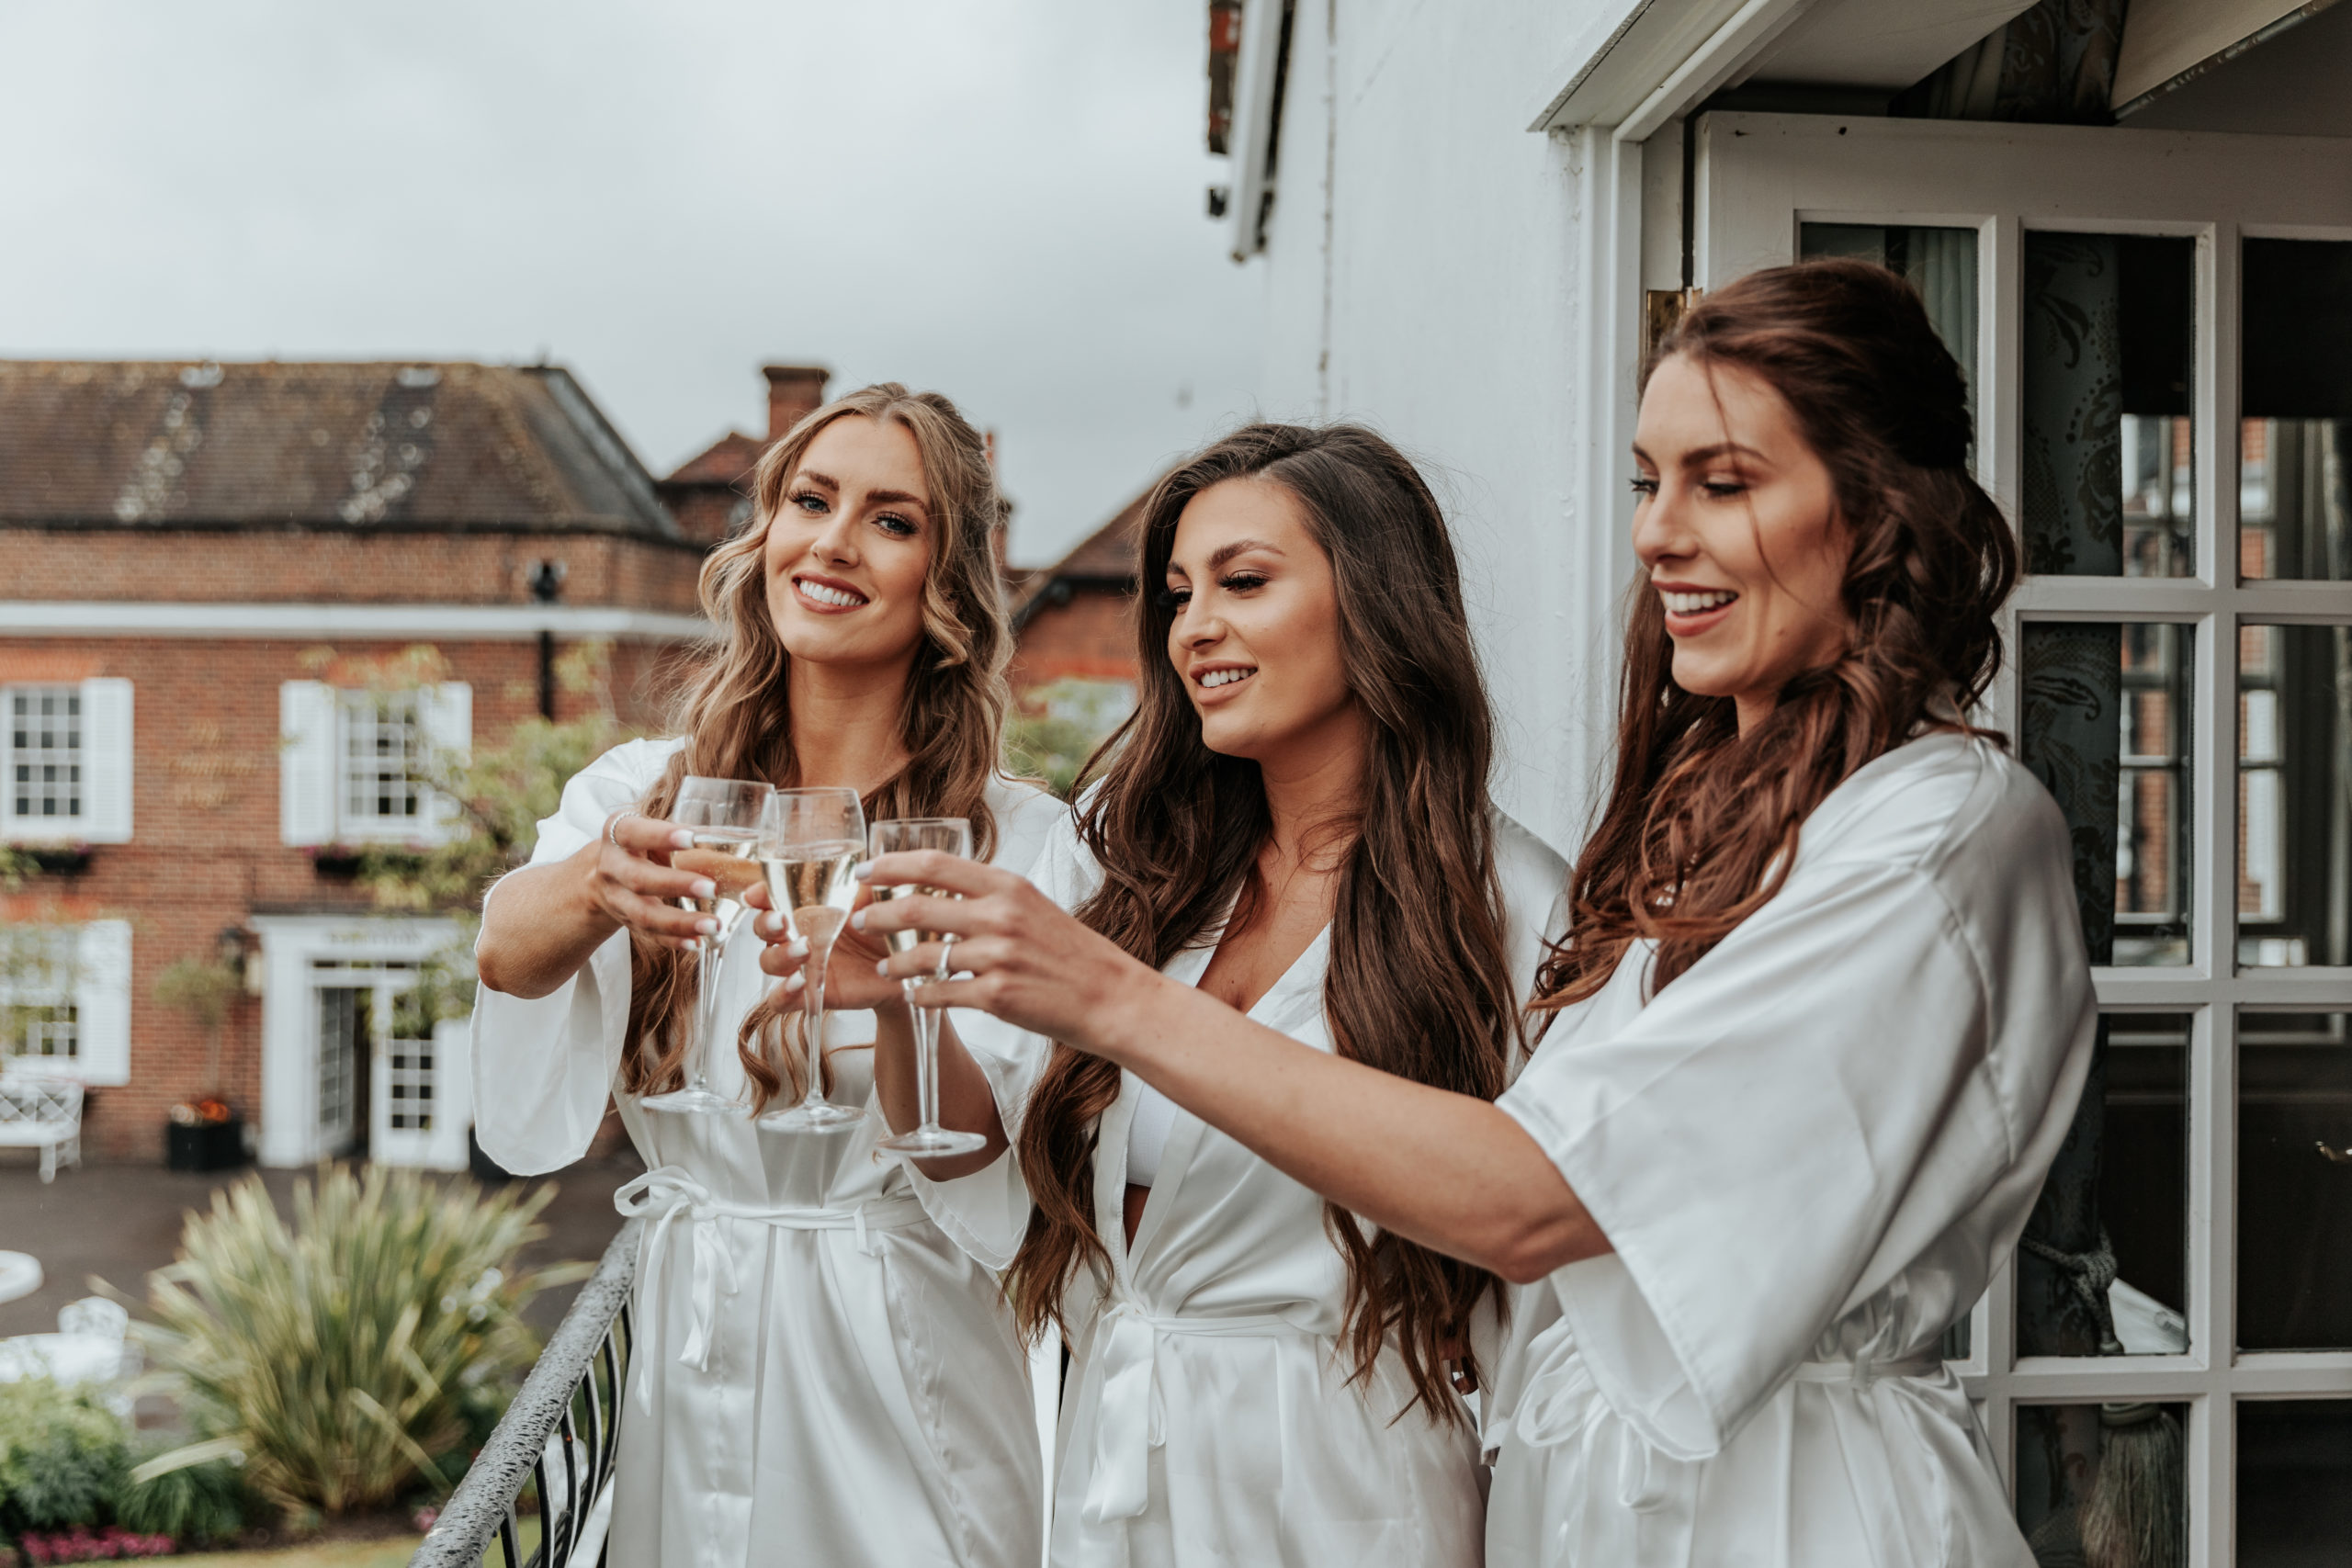 Emma and her sisters cheers prosecco on the balcony in their matching dressing gowns during their getting ready photos